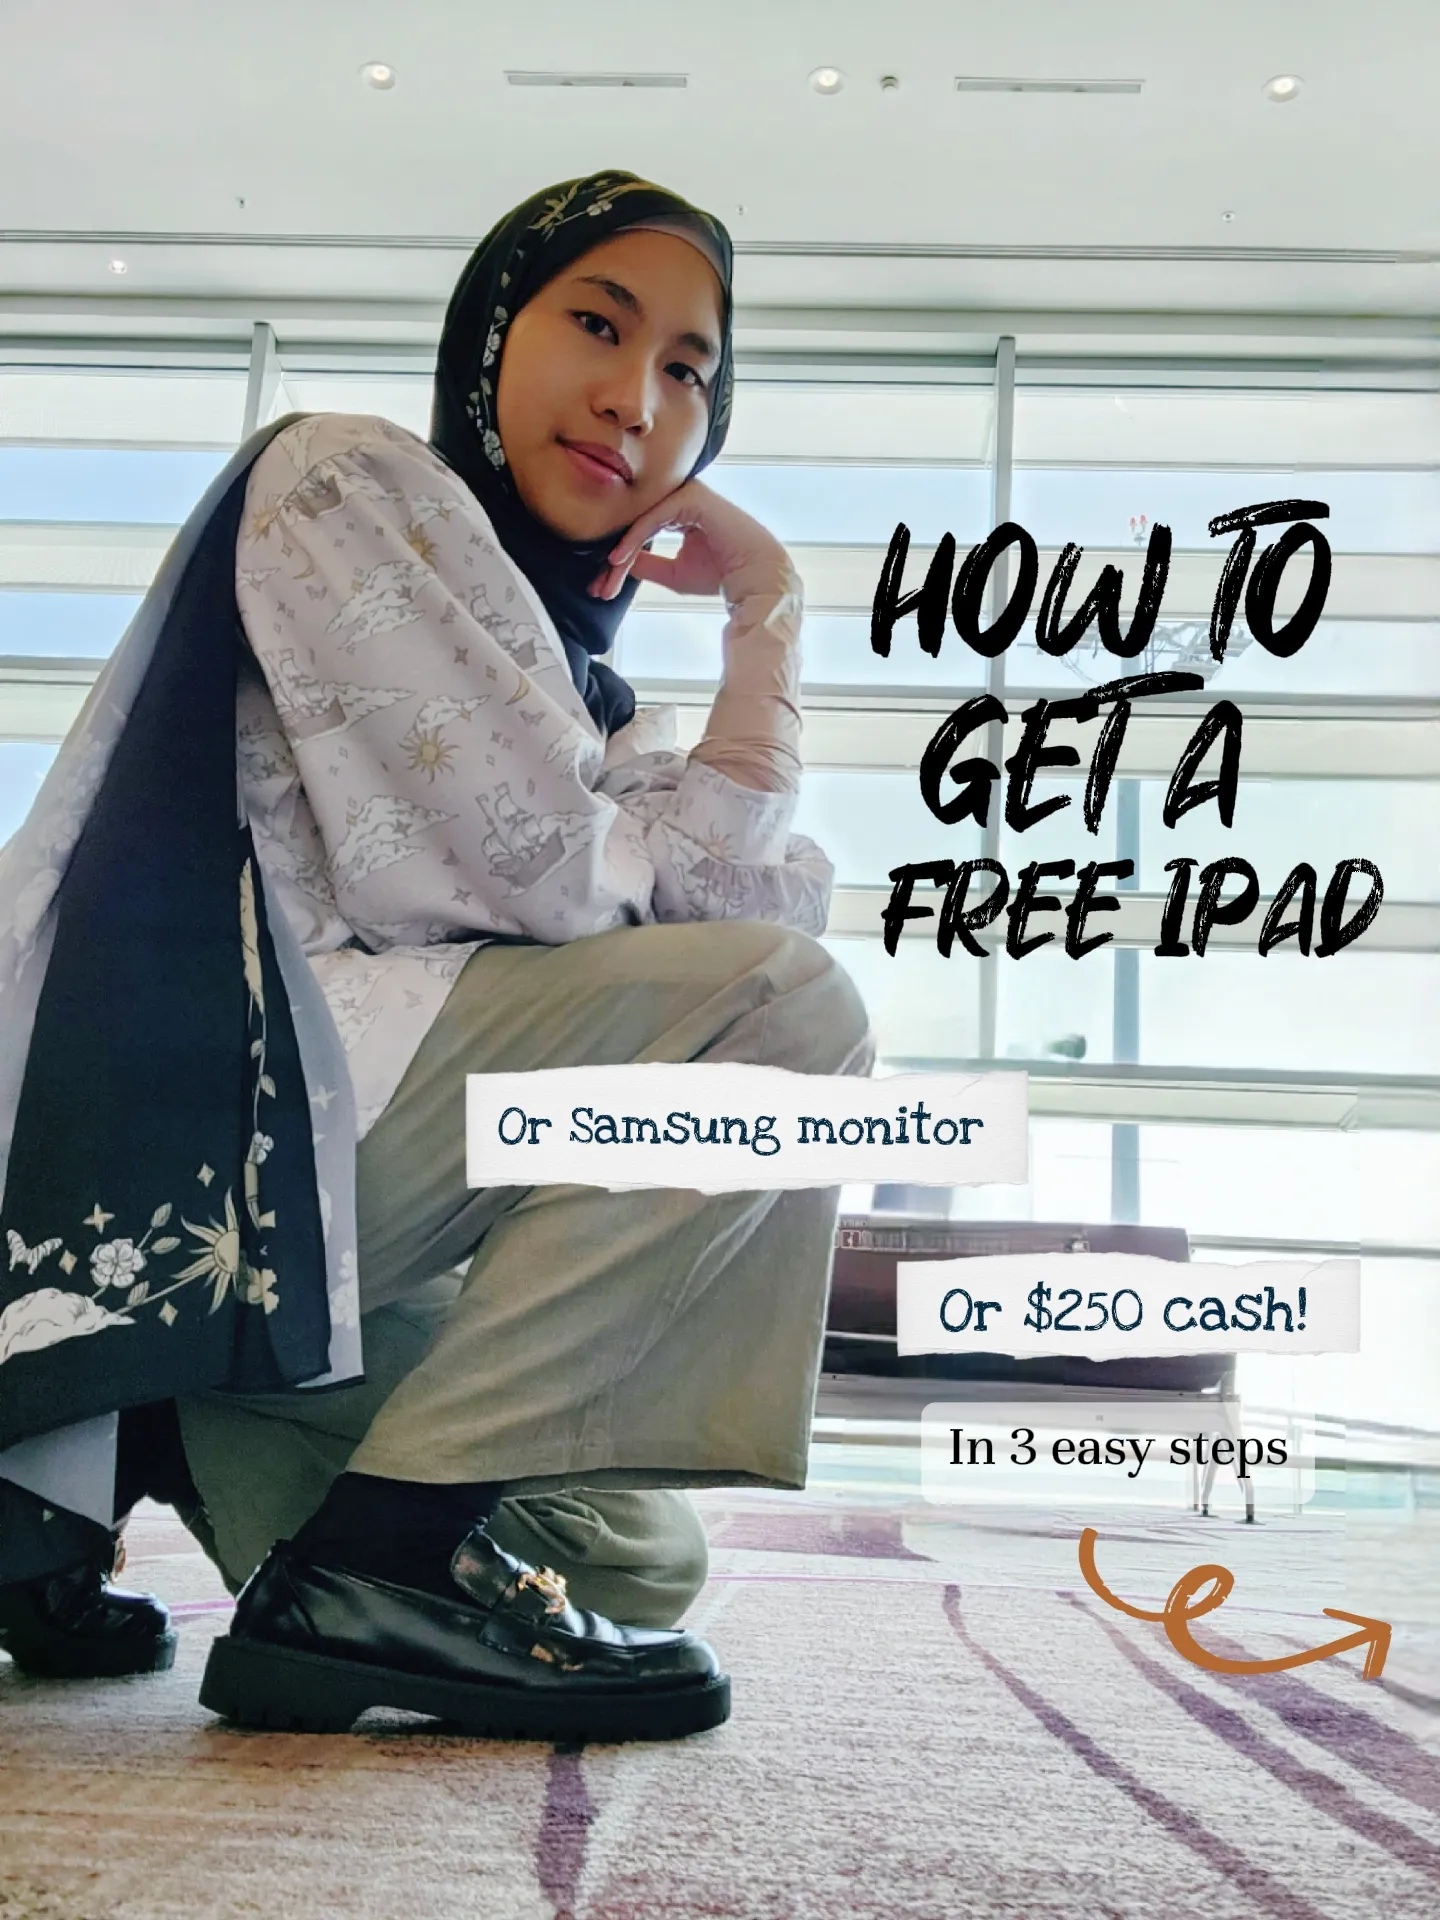 How to get a FREE IPAD!! In 3 easy steps 😍's images